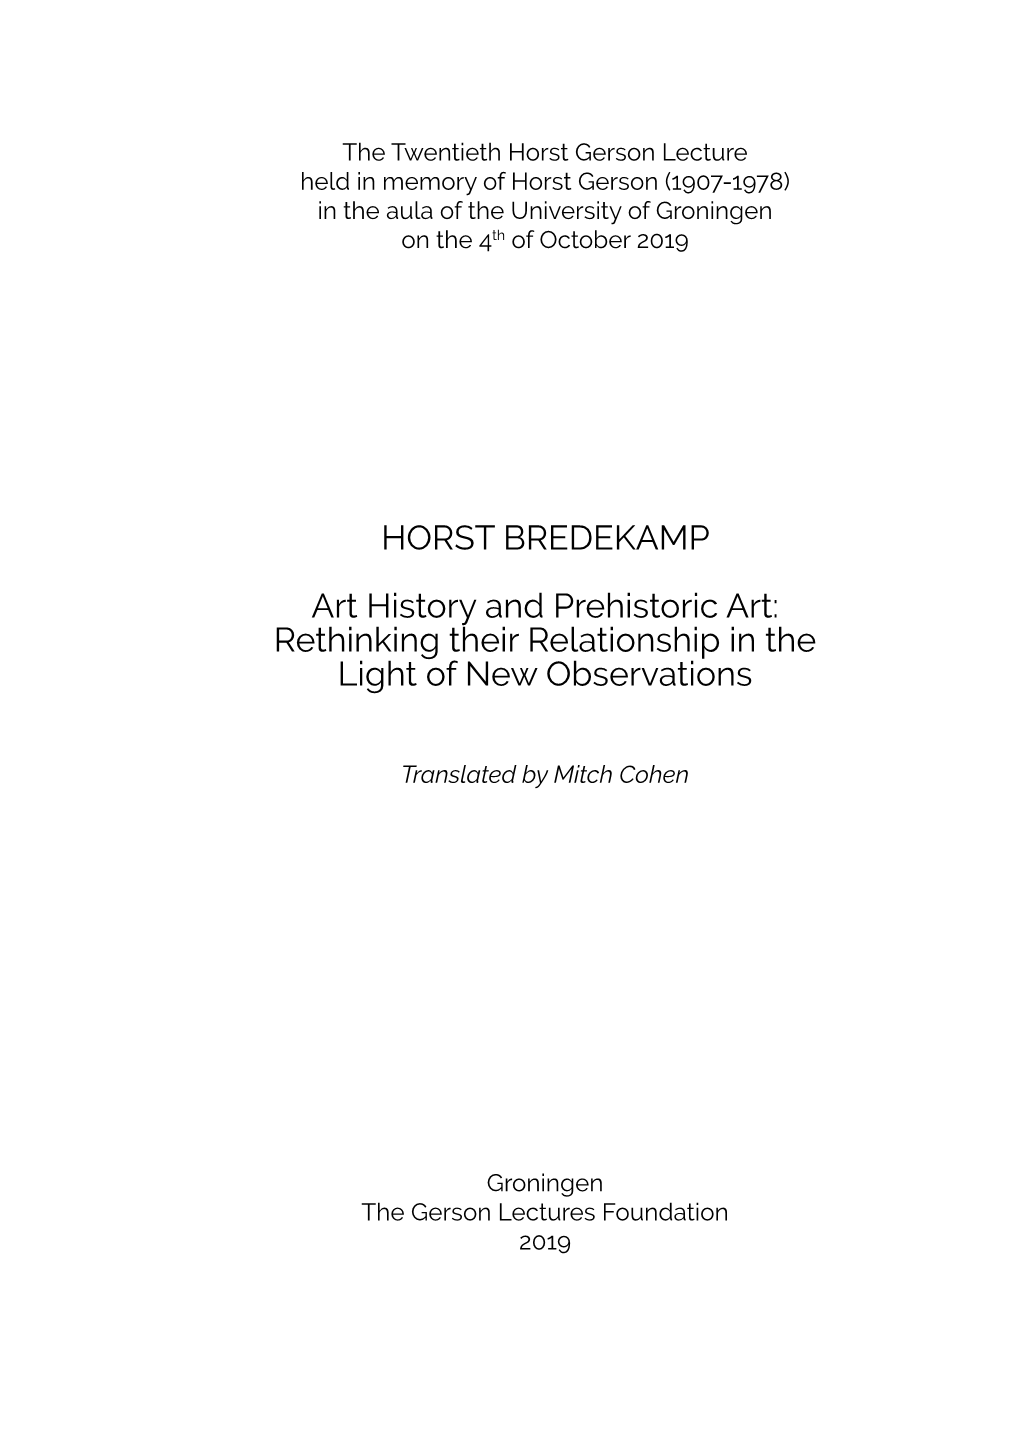 Horst Bredekamp Art History and Prehistoric Art: Rethinking Their Relationship in the Light of New Observations